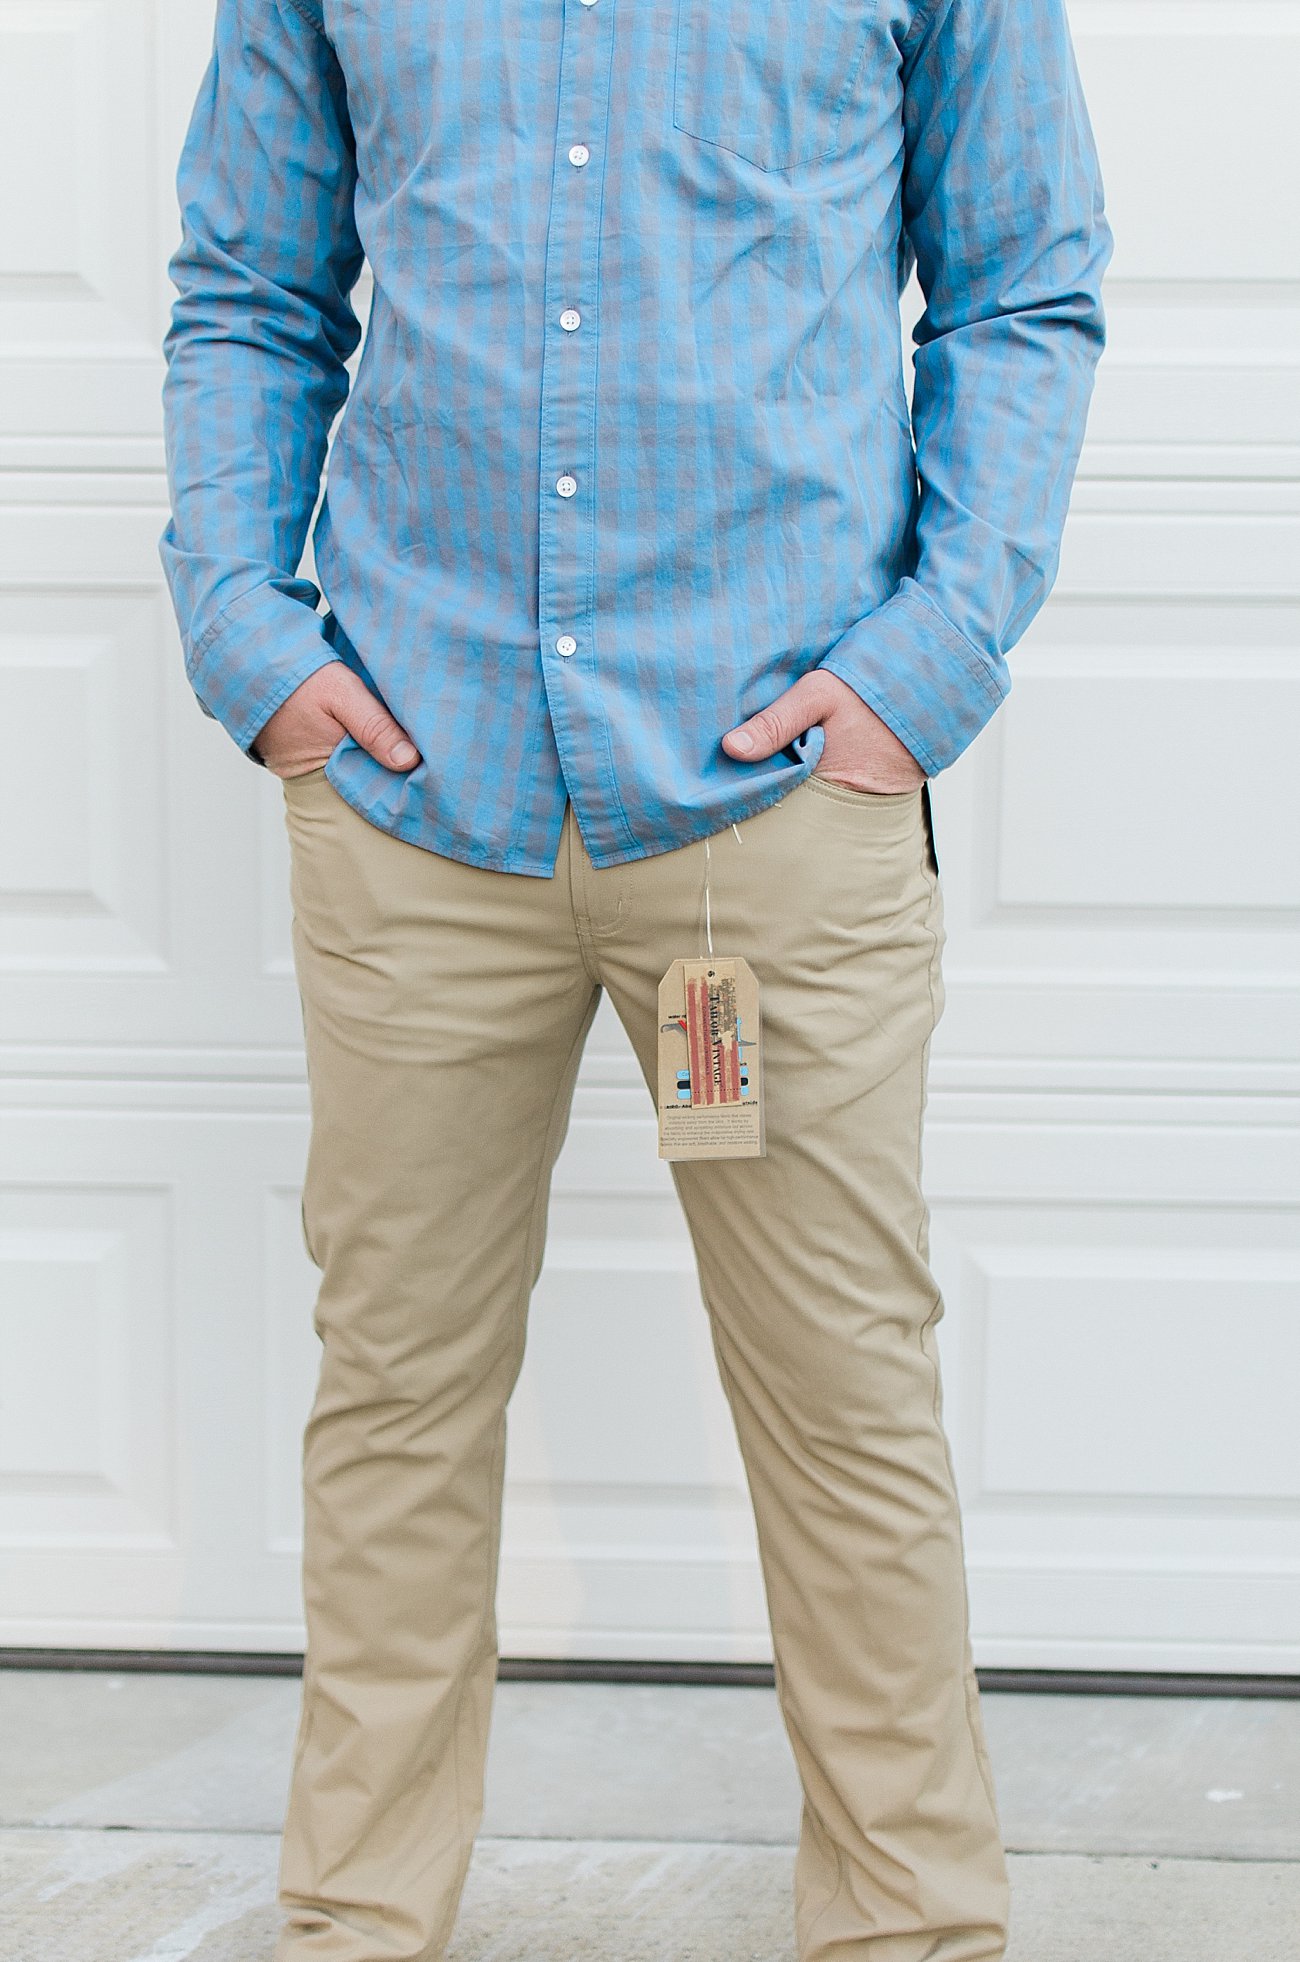 TAILOR VINTAGE - Westport Performance Pant - SIZE 34 - $78 John's Recent Stitch Fix for Men Review by fashion blogger Still Being Molly